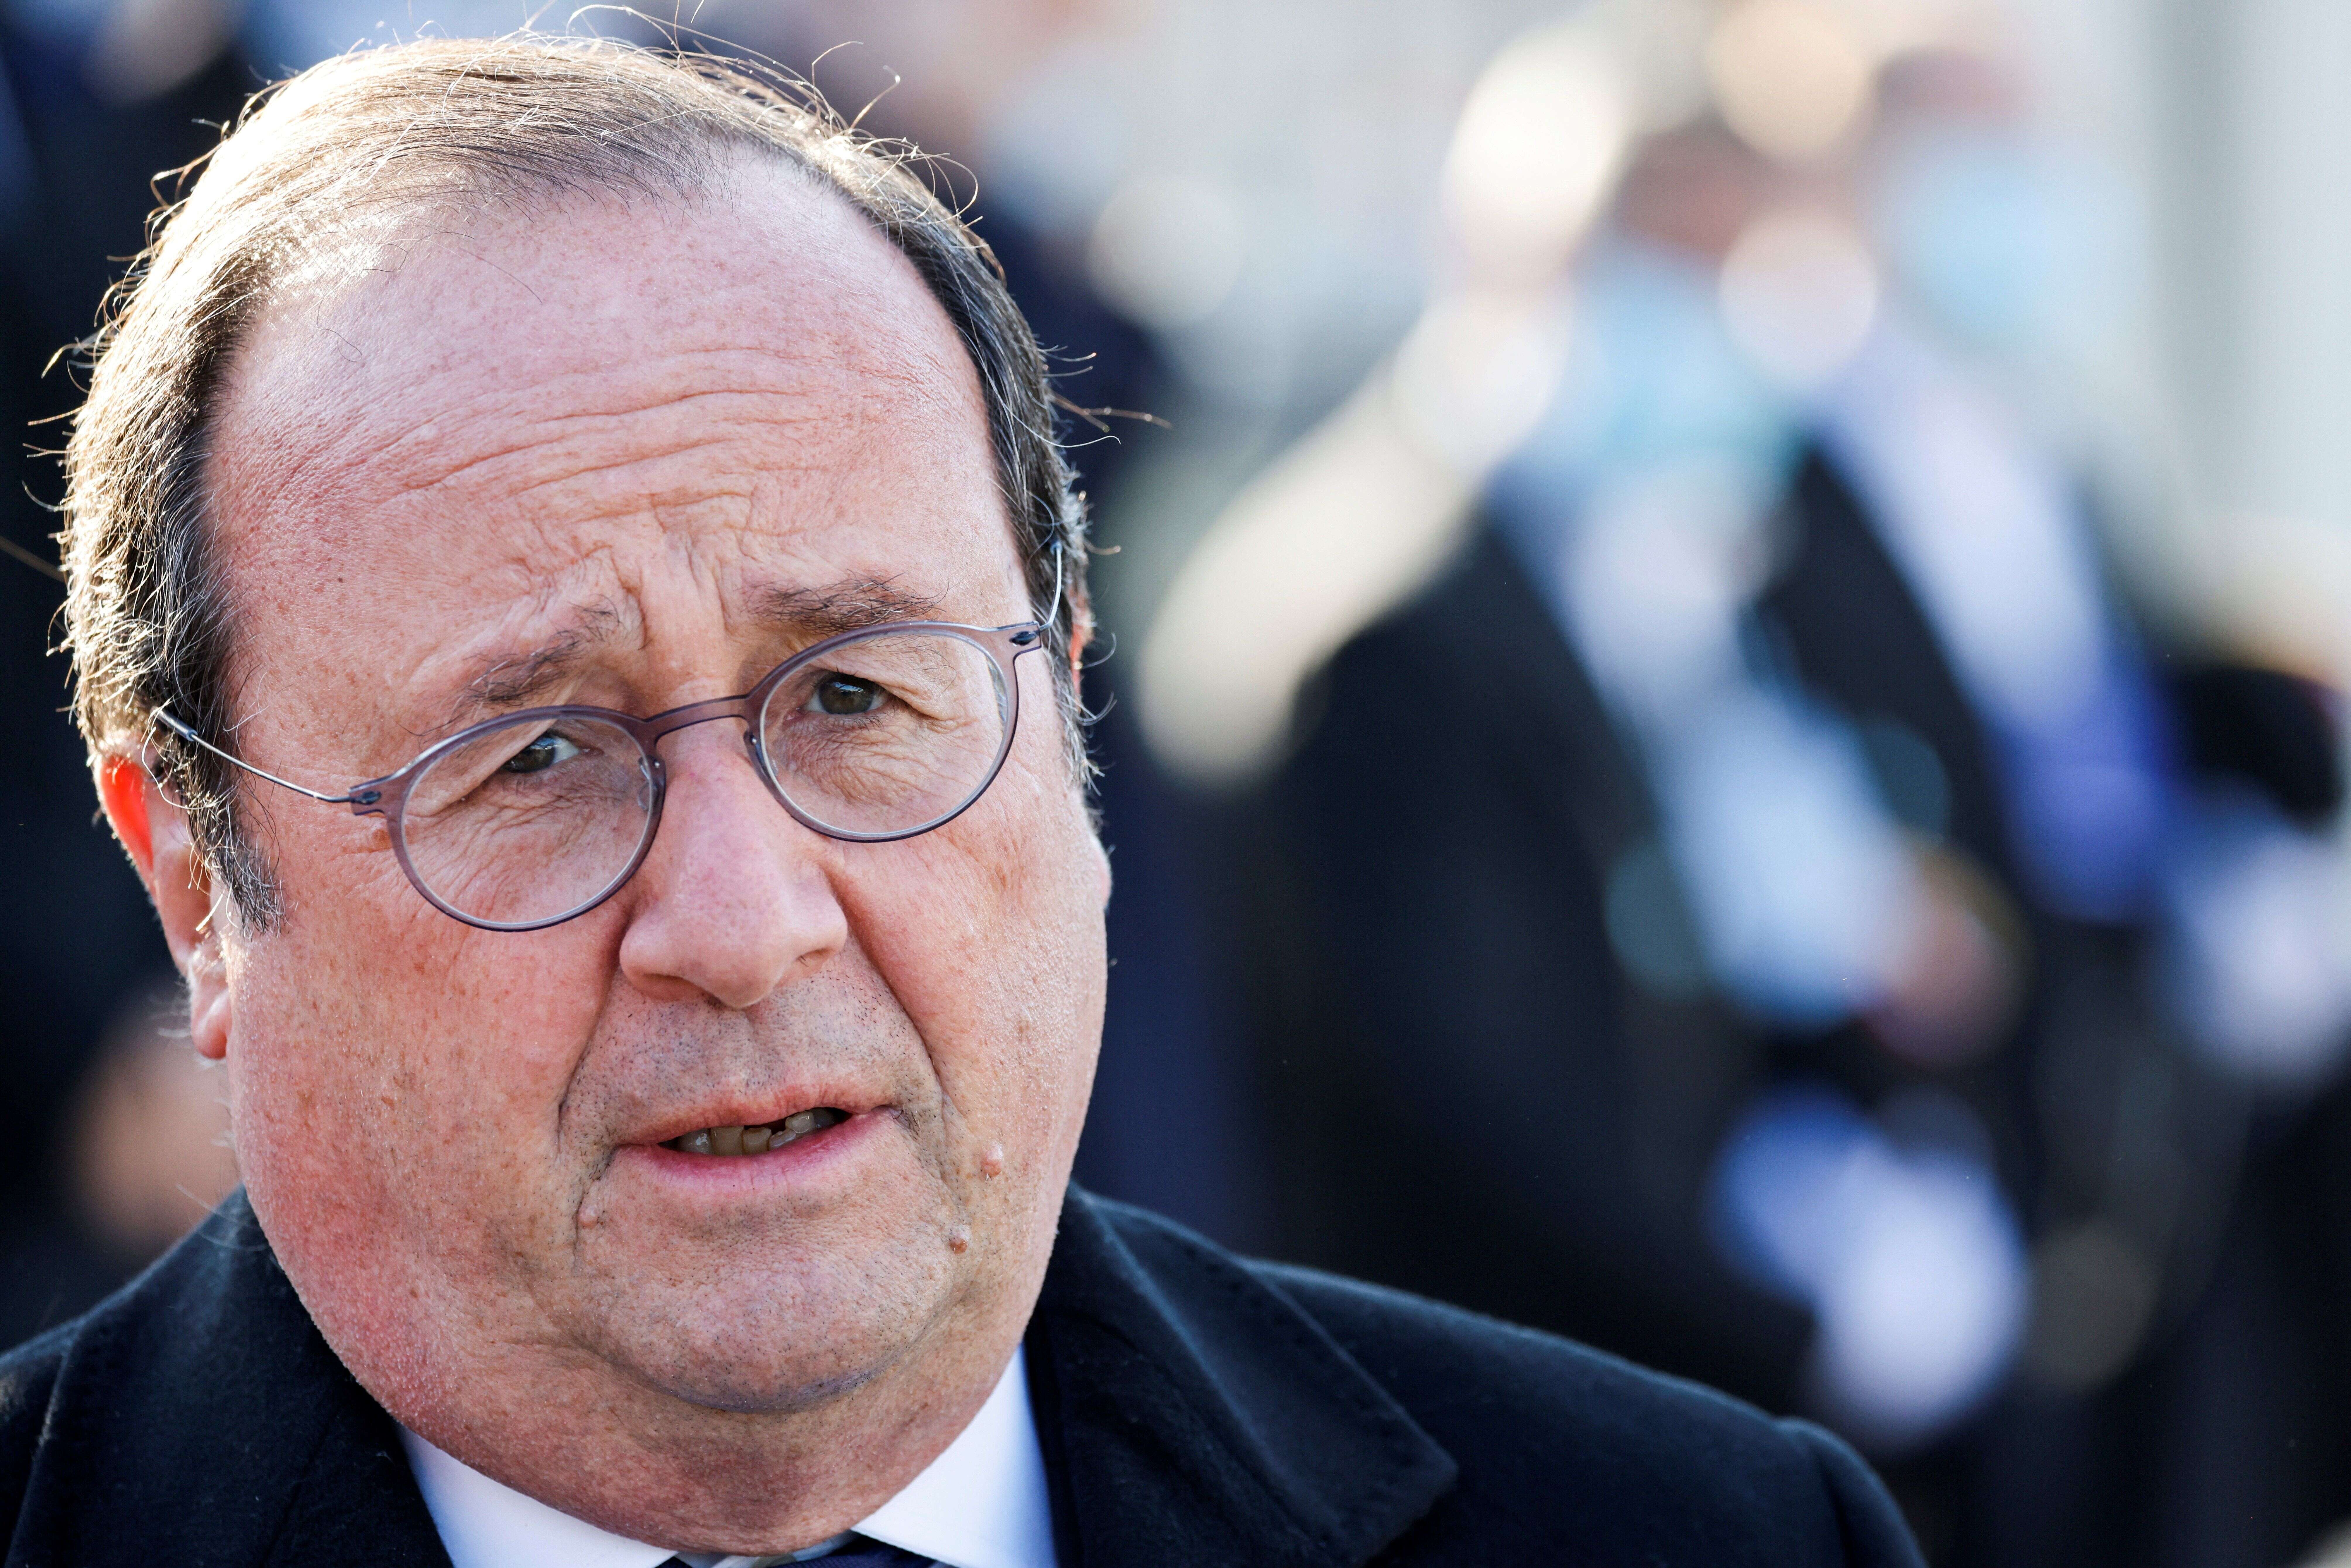 Former French president Francois Hollande attends a ceremony as part of commemorations marking the 103rd anniversary of the November 11, 1918 Armistice, ending World War I, at the Arc de Triomphe, in Paris, France, November 11, 2021. Ludovic Marin/Pool via REUTERS